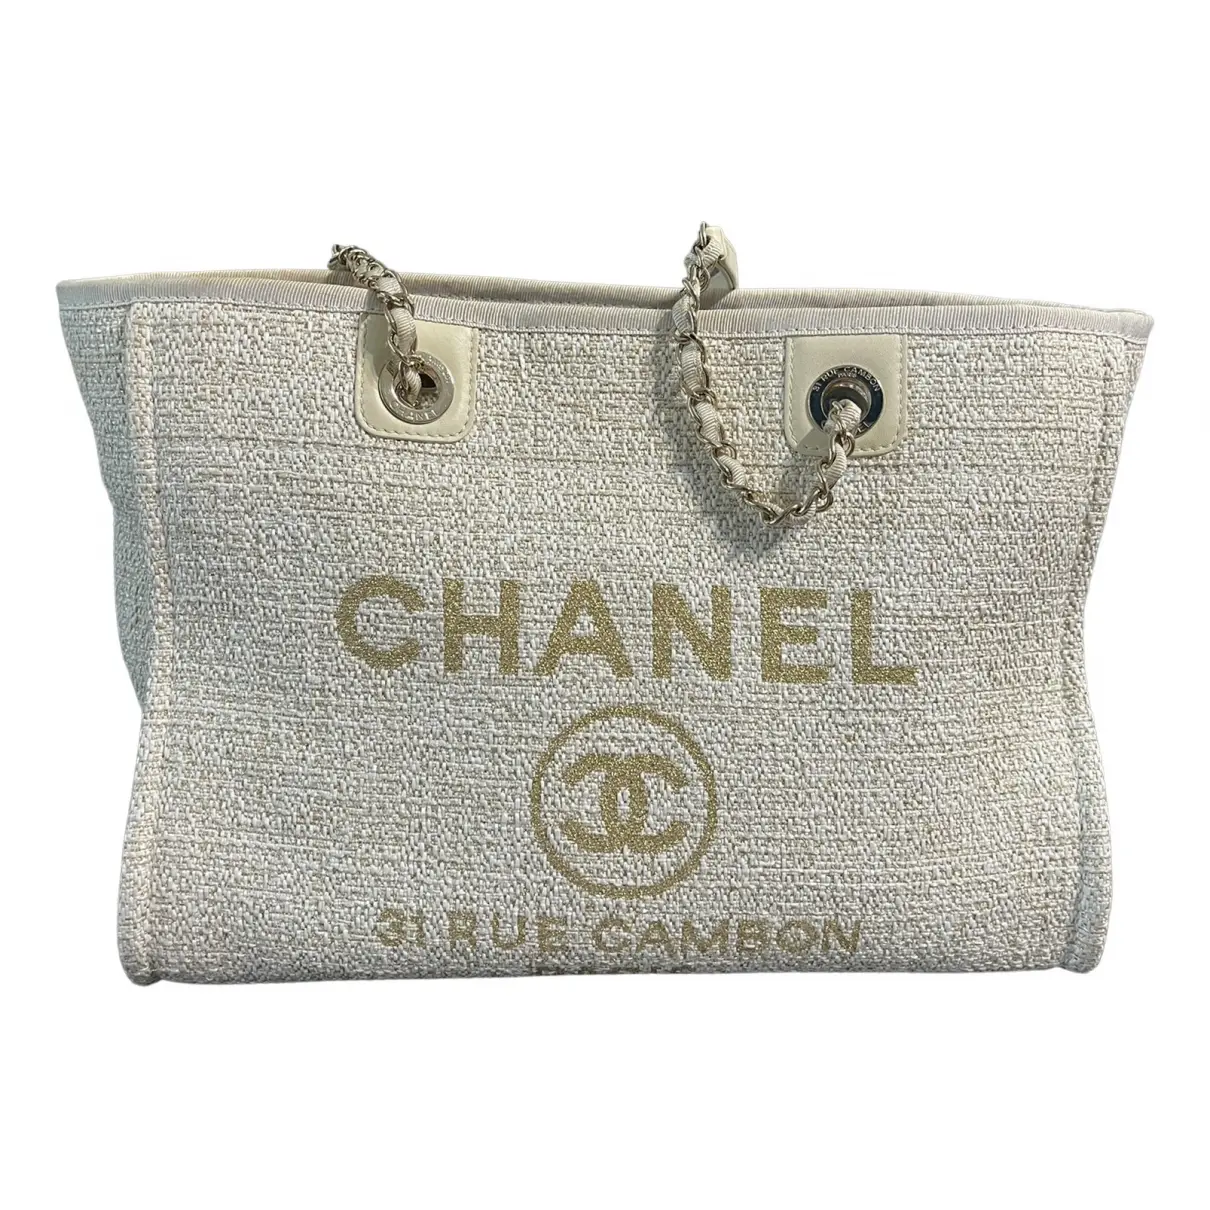 Deauville Chain tweed tote Chanel